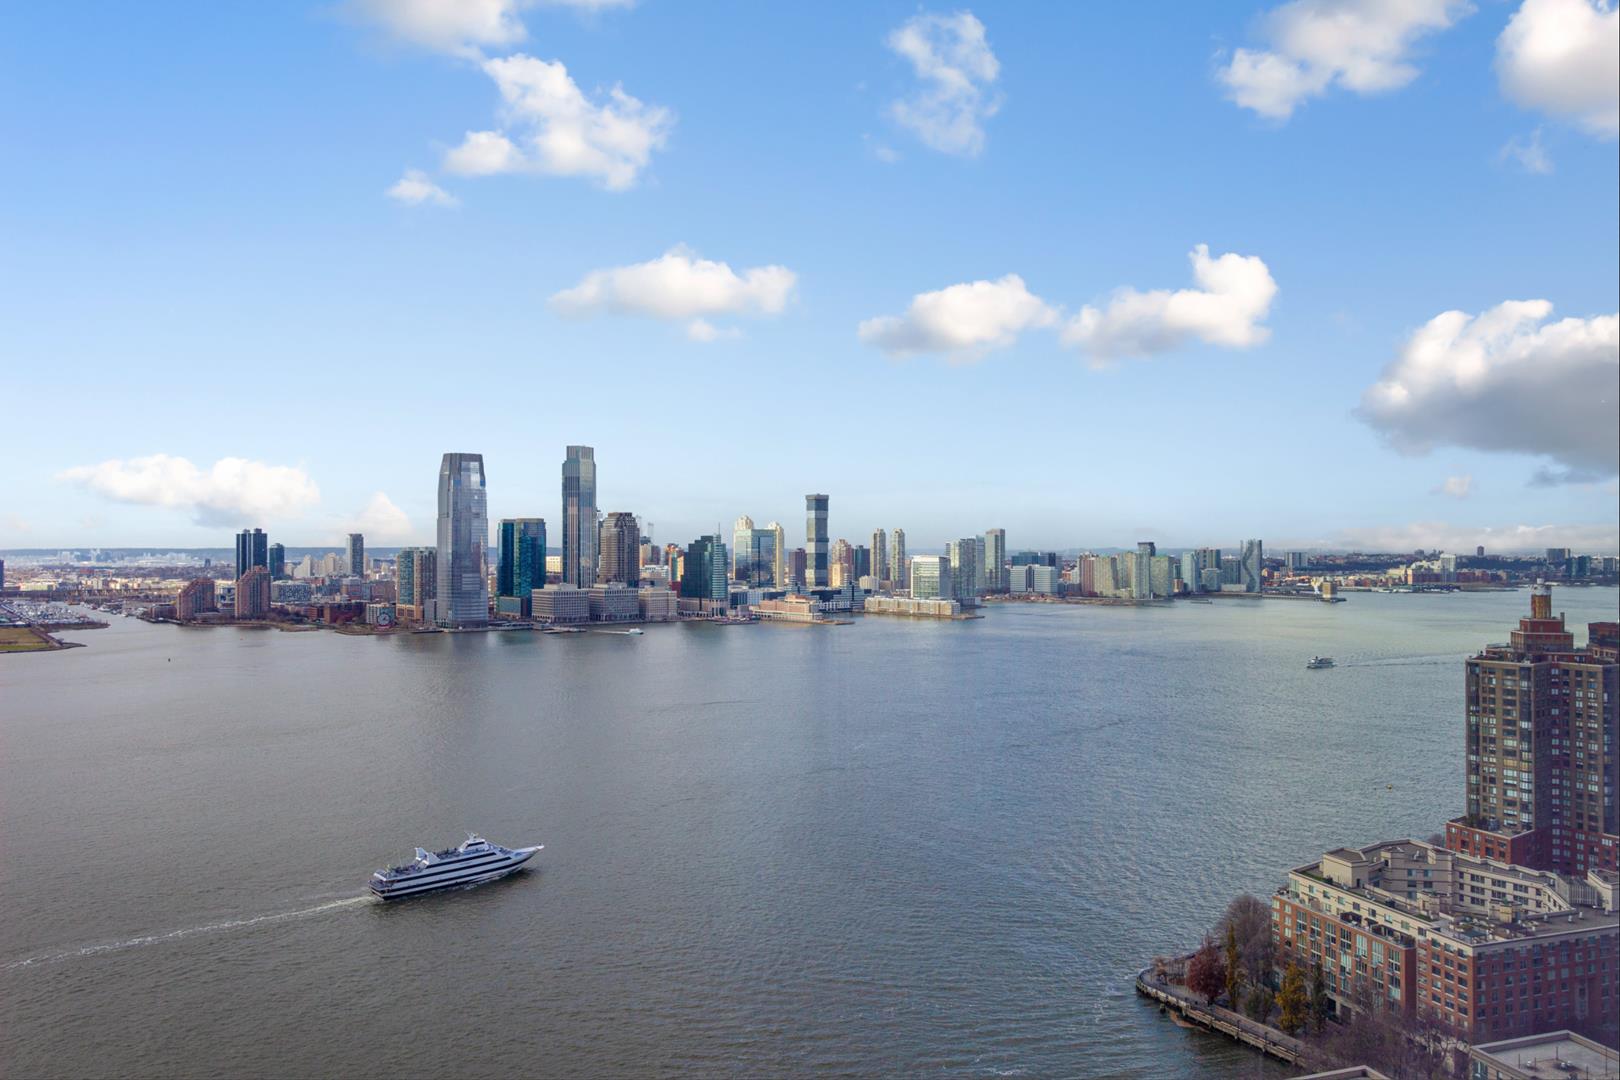 10 Little West Street 35-C, Battery Park City, Downtown, NYC - 2 Bedrooms  
2.5 Bathrooms  
4 Rooms - 